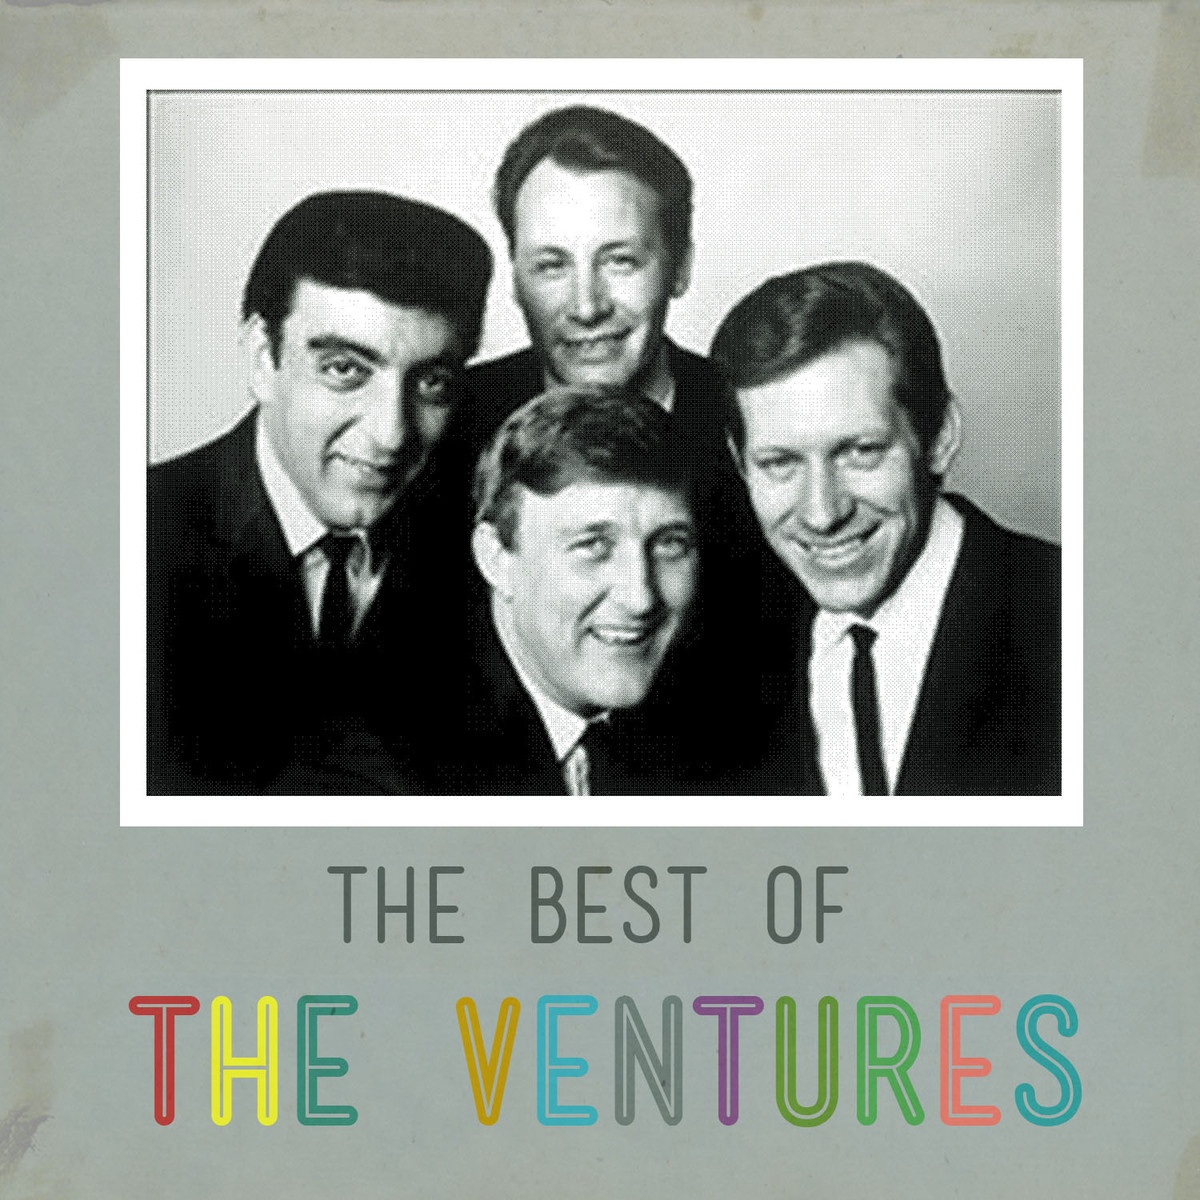 The Best of the Ventures